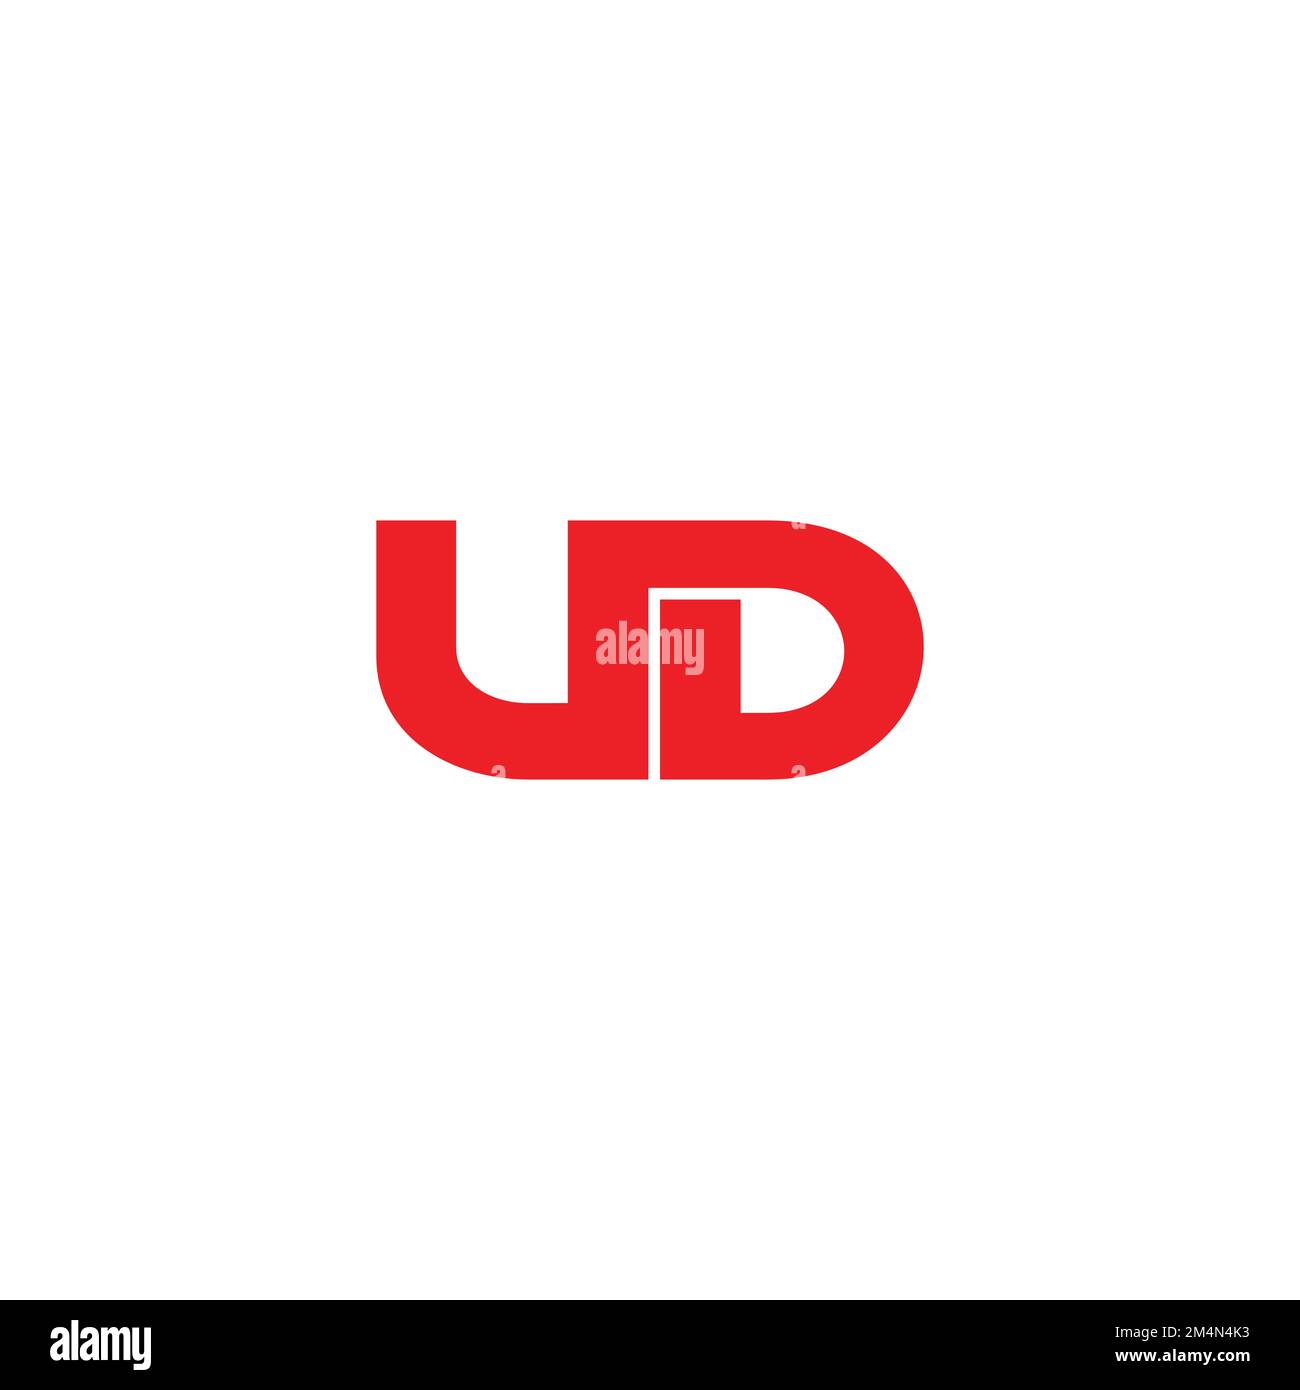 letter ud linked linear simple geometric logo vector Stock Vector